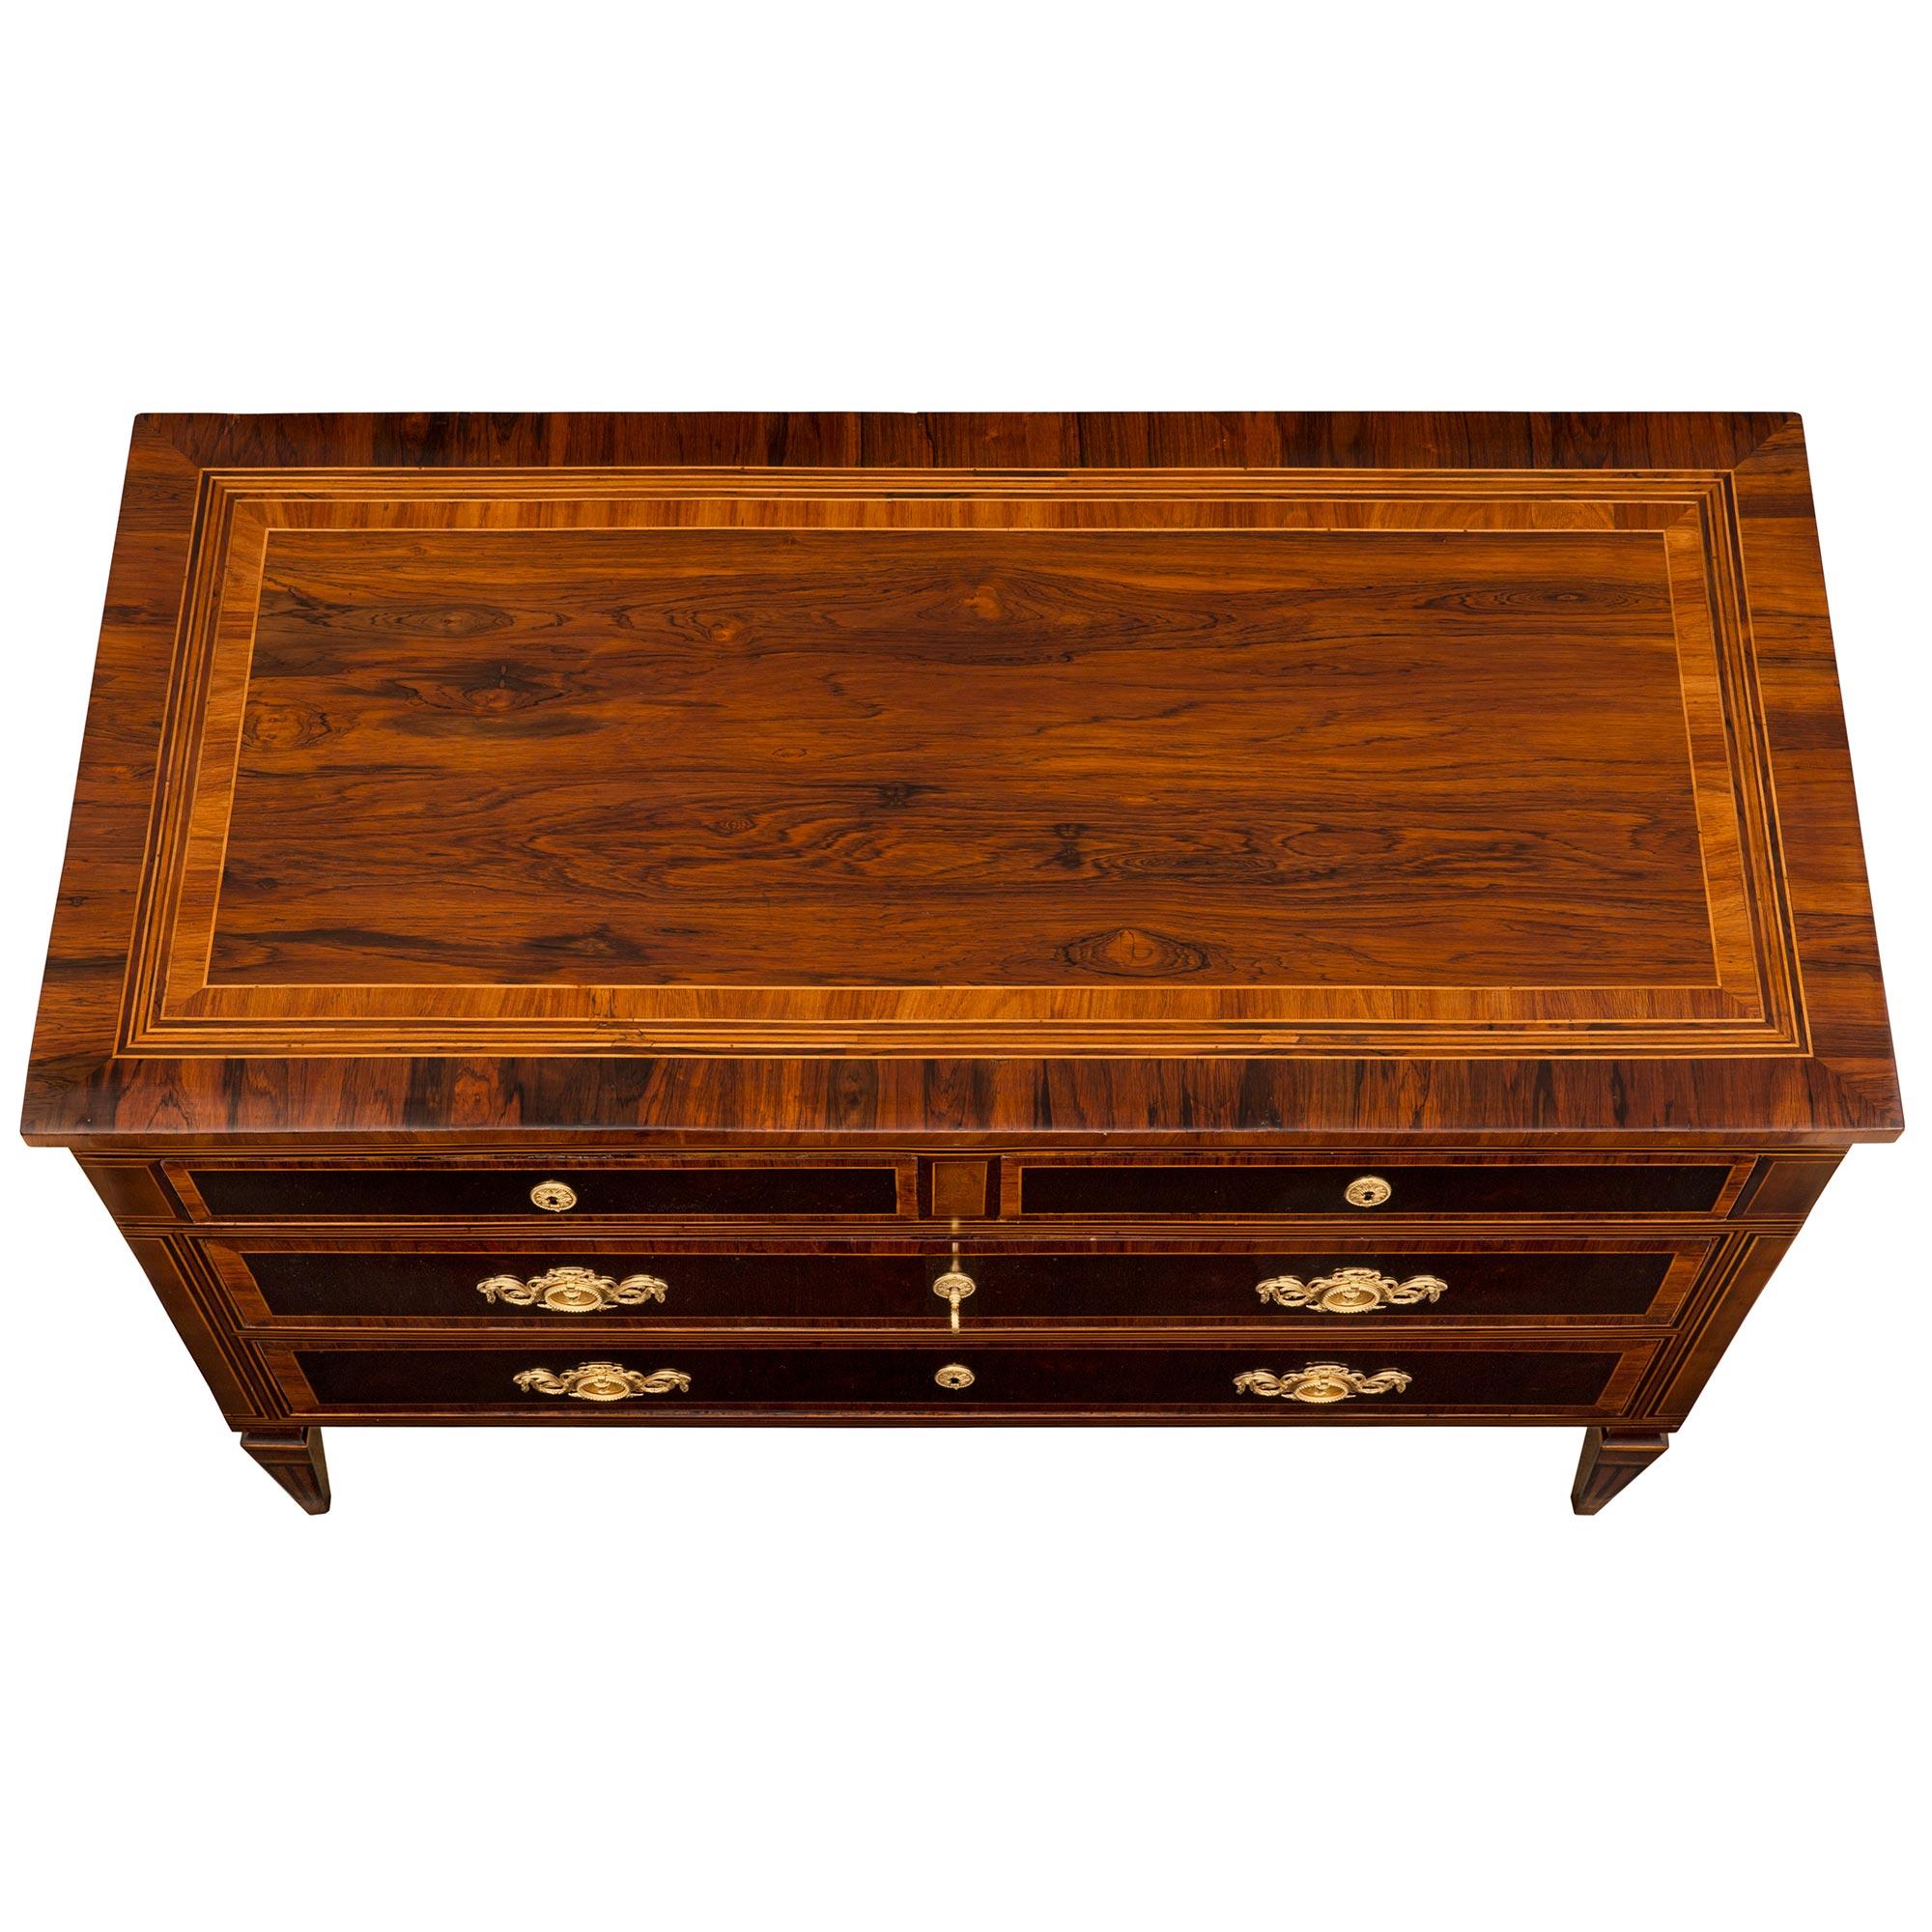 A stunning and most elegant pair of Italian 18th century Louis XVI period rosewood, tulipwood, and ormolu commodes. Each four drawer chest is raised by fine square tapered legs with lovely and most decorative inlaid designs. Above the straight